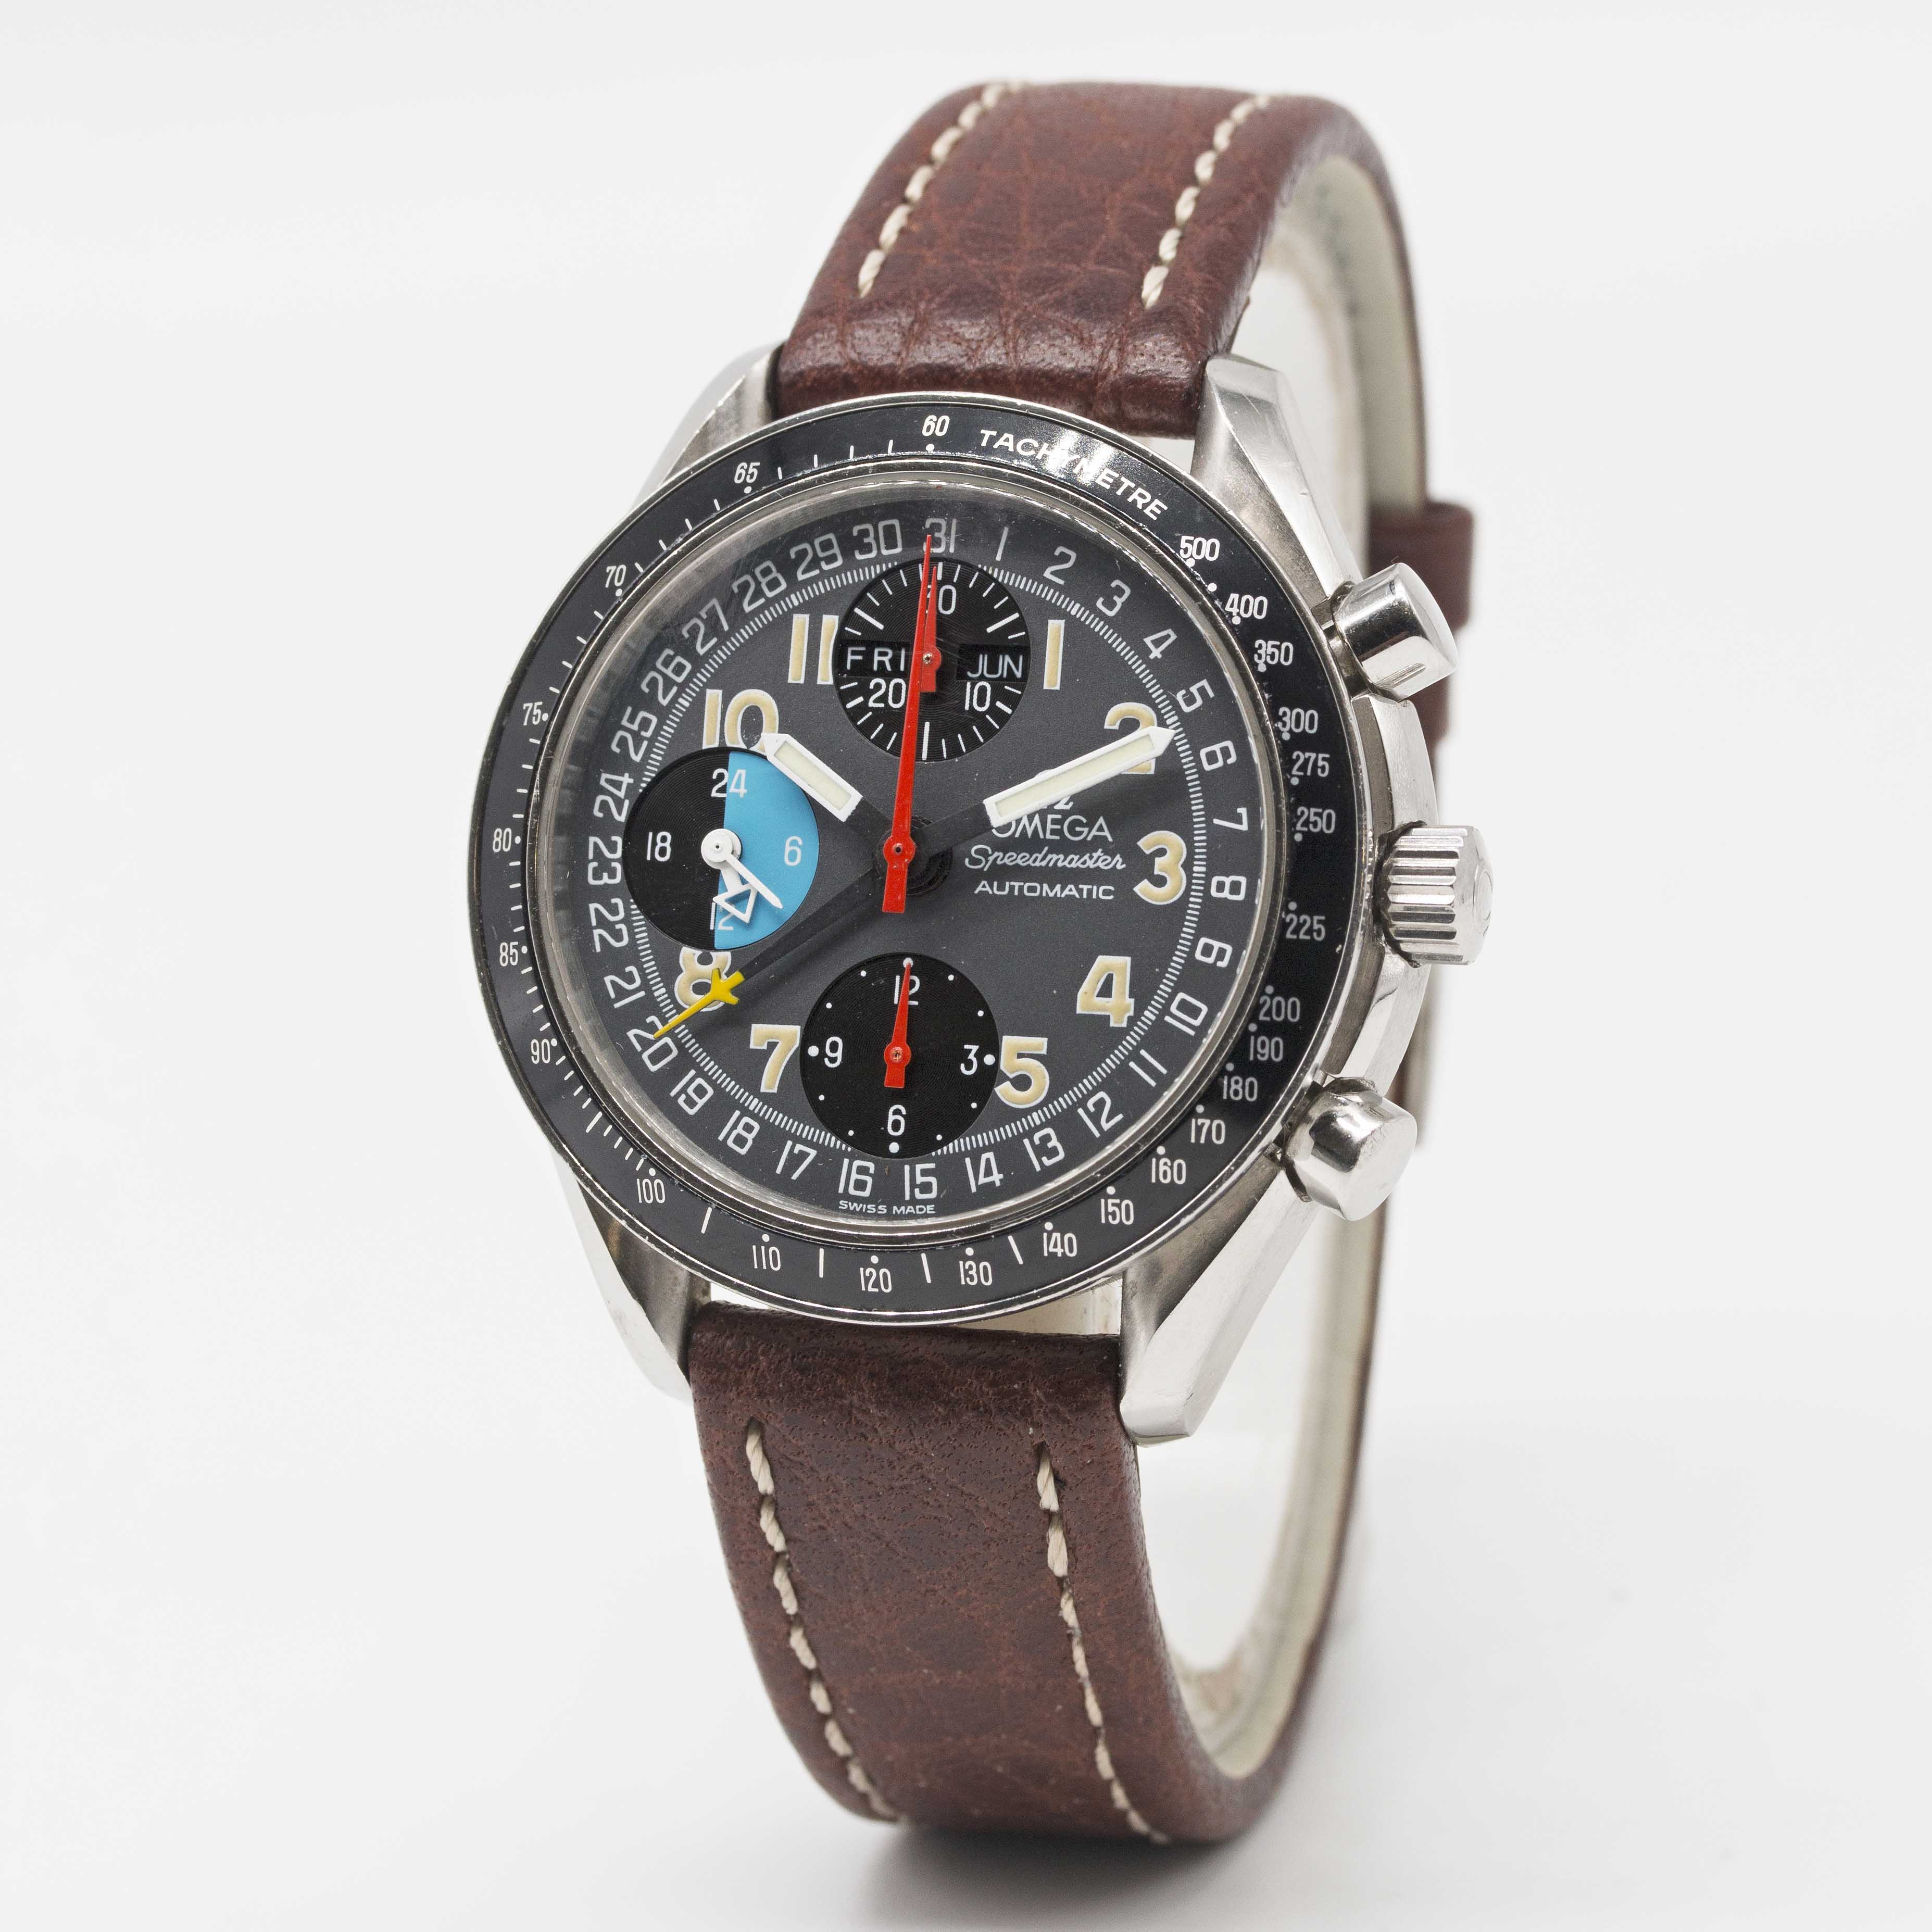 A GENTLEMAN'S STAINLESS STEEL OMEGA SPEEDMASTER "MK 40" TRIPLE CALENDAR AUTOMATIC CHRONOGRAPH - Image 3 of 6